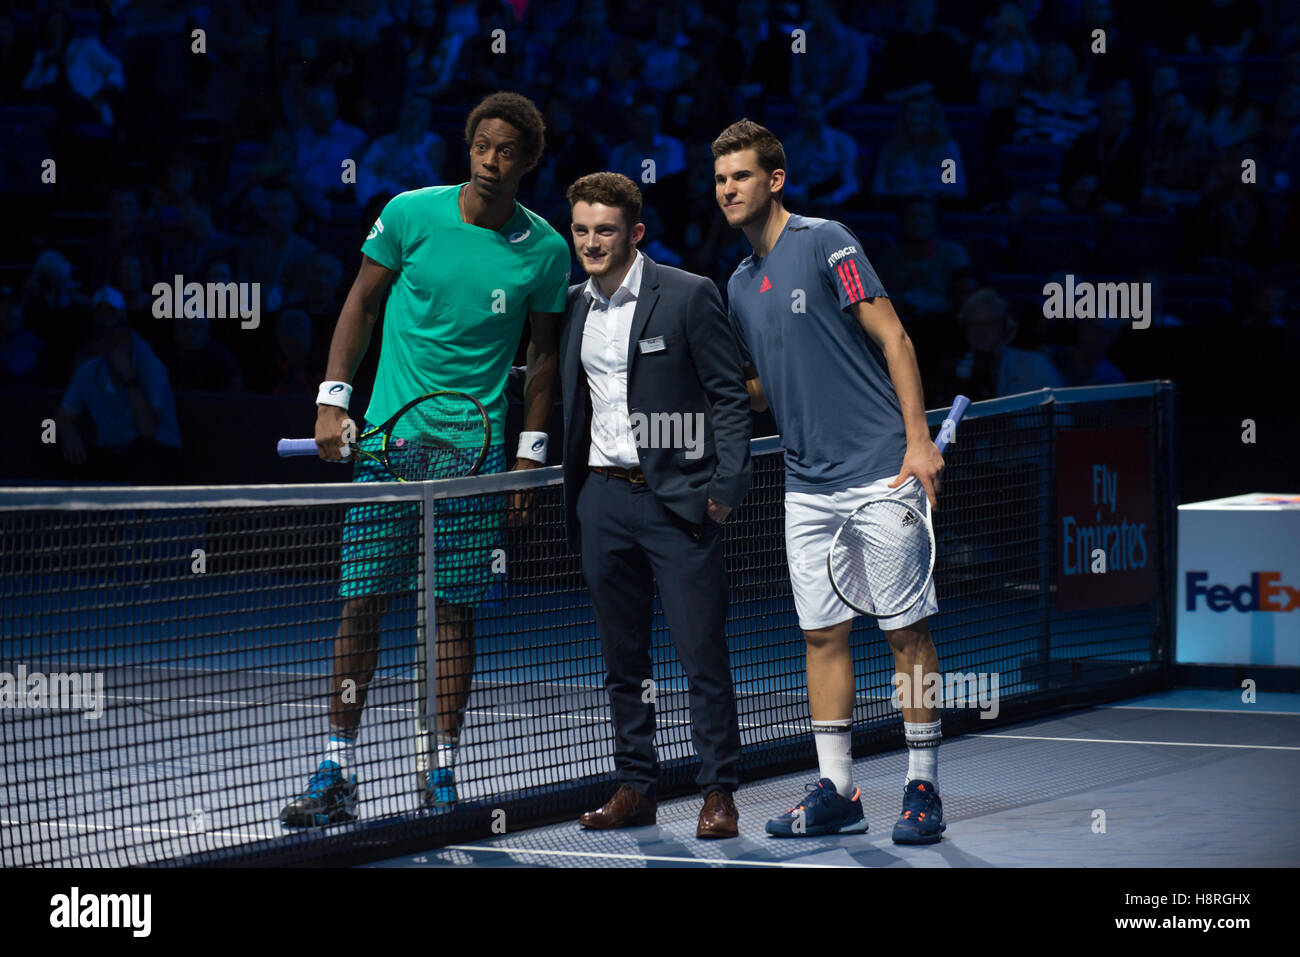 London, UK. 15th Nov, 2016. Barclays ATP Finals: Singles, Dominic Thiem  (AUT) and Gael Monfils (FRA) play the second match of round robin Group  Ivan Lendl at ATP Finals. Credit: Alberto Pezzali/Pacific